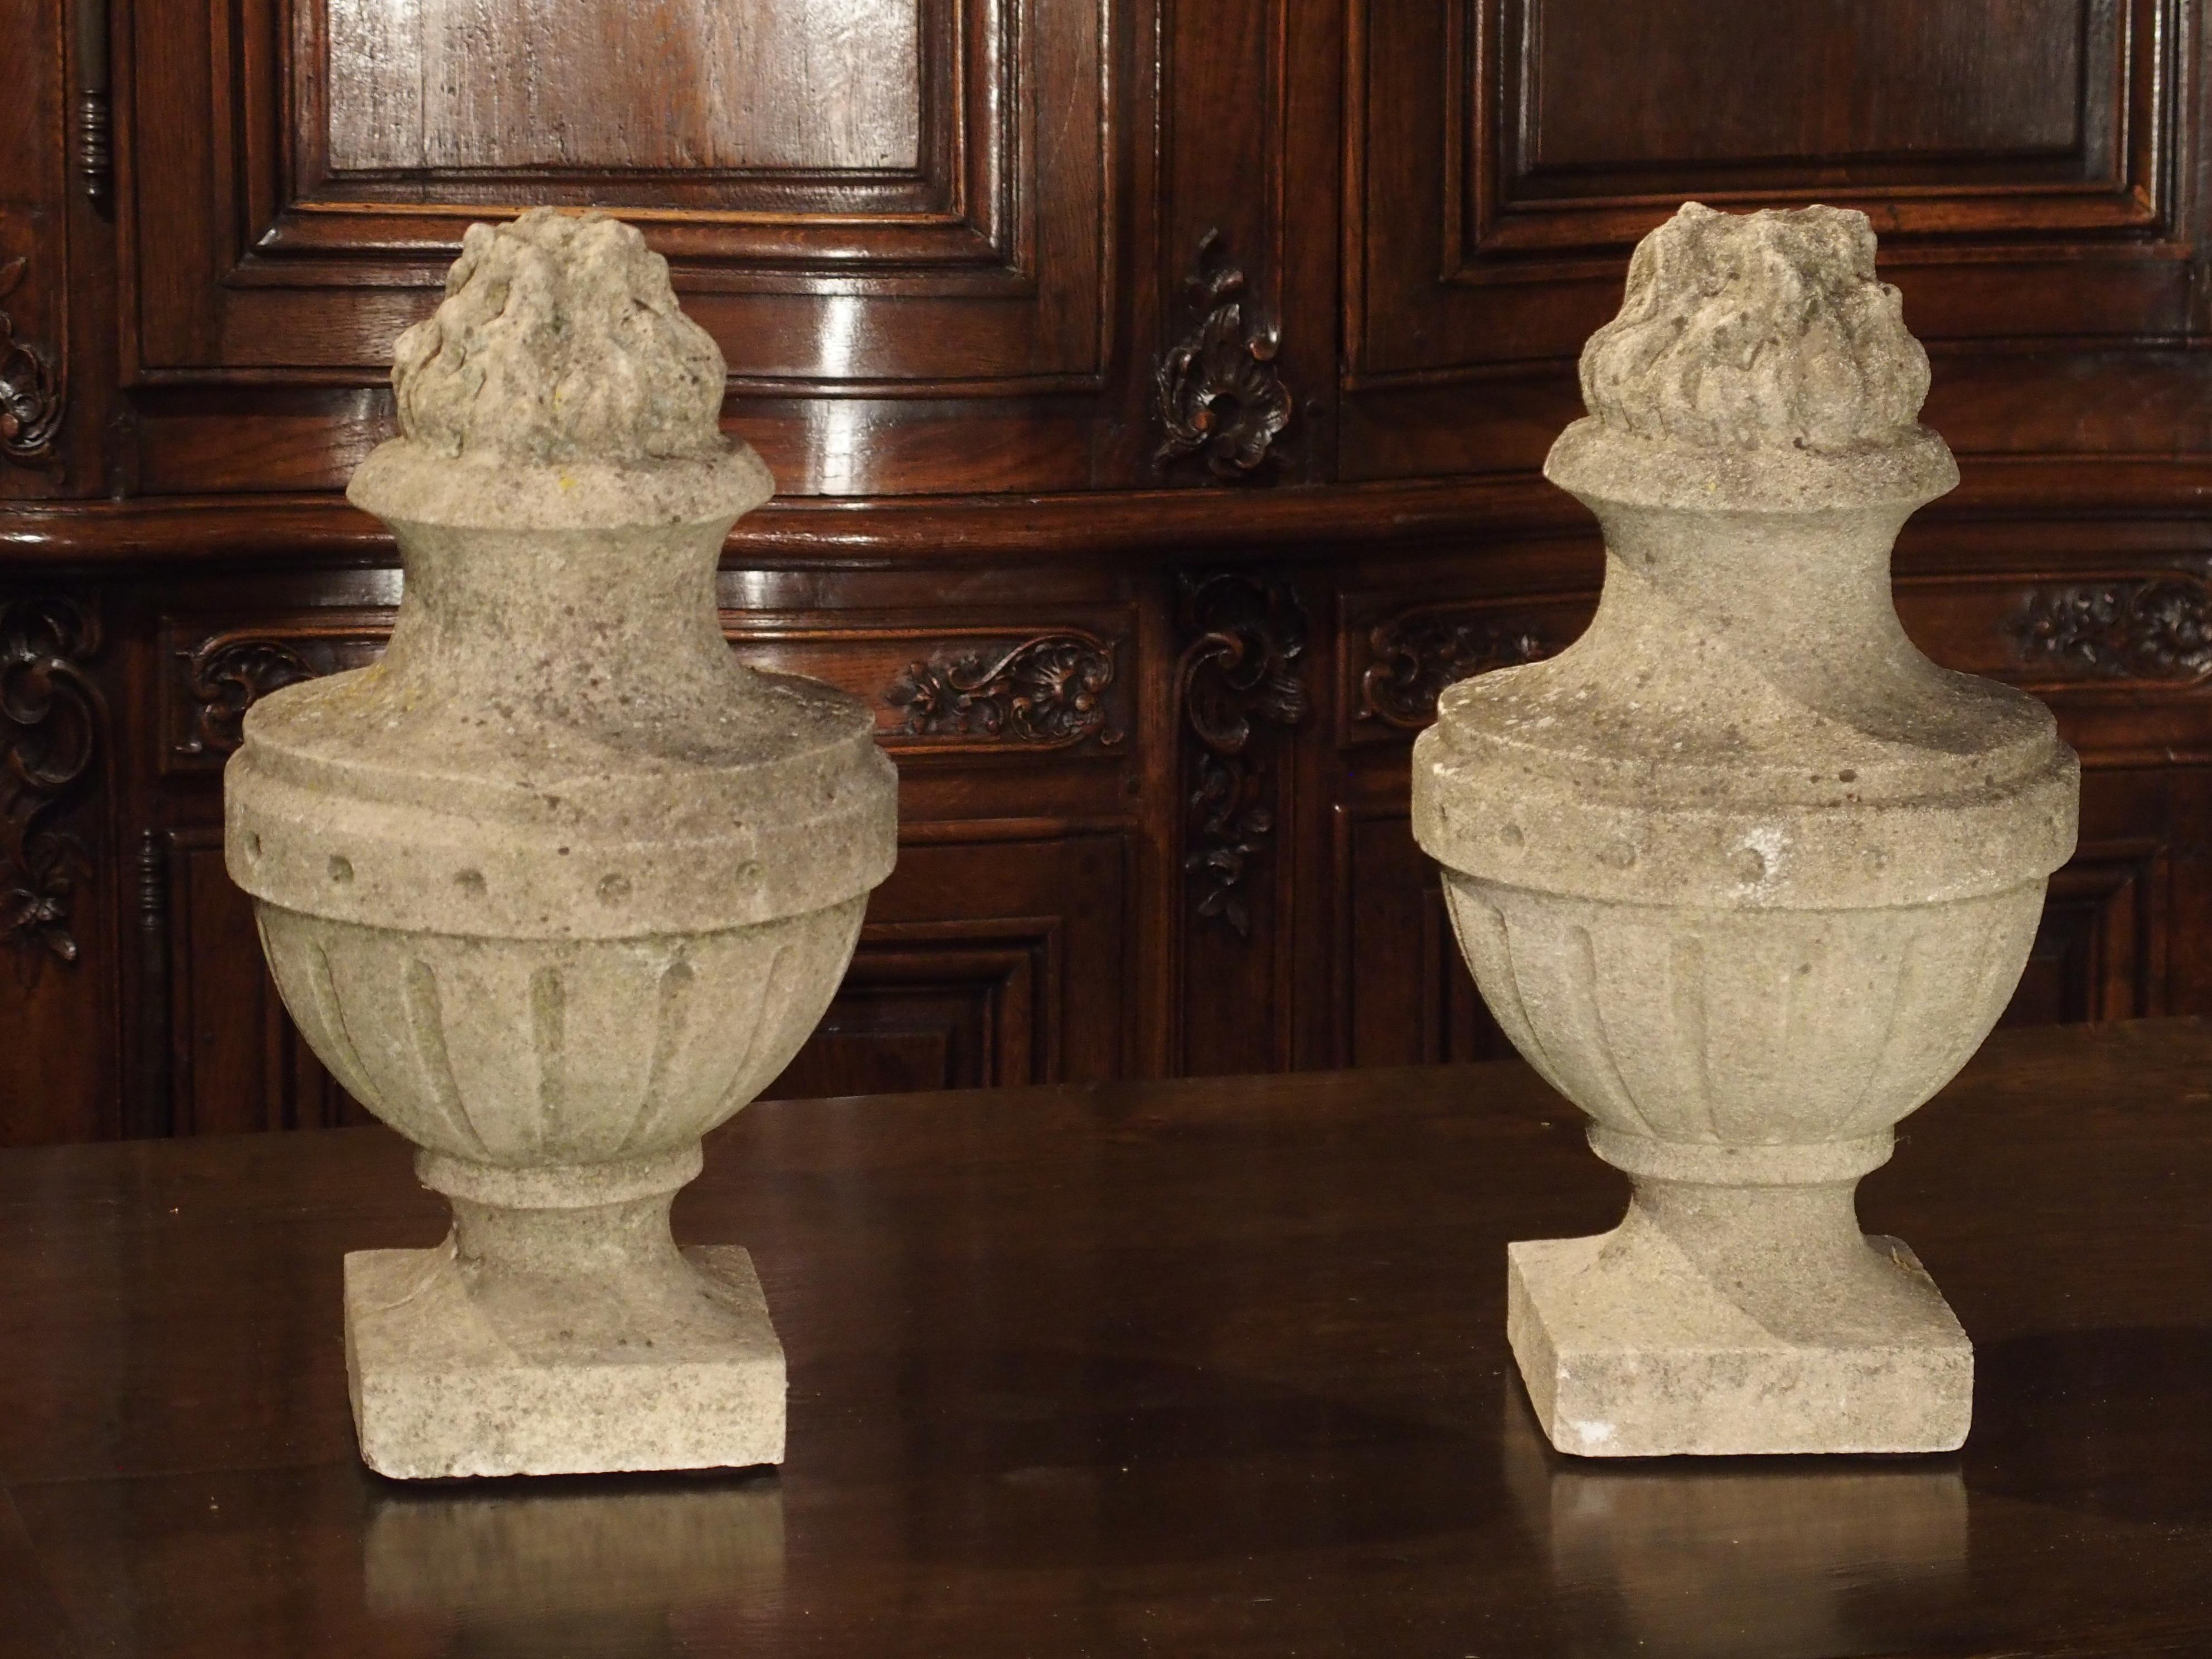 Pair of Carved Antique Limestone Pots a Feu from France, 19th Century (Kalkstein)